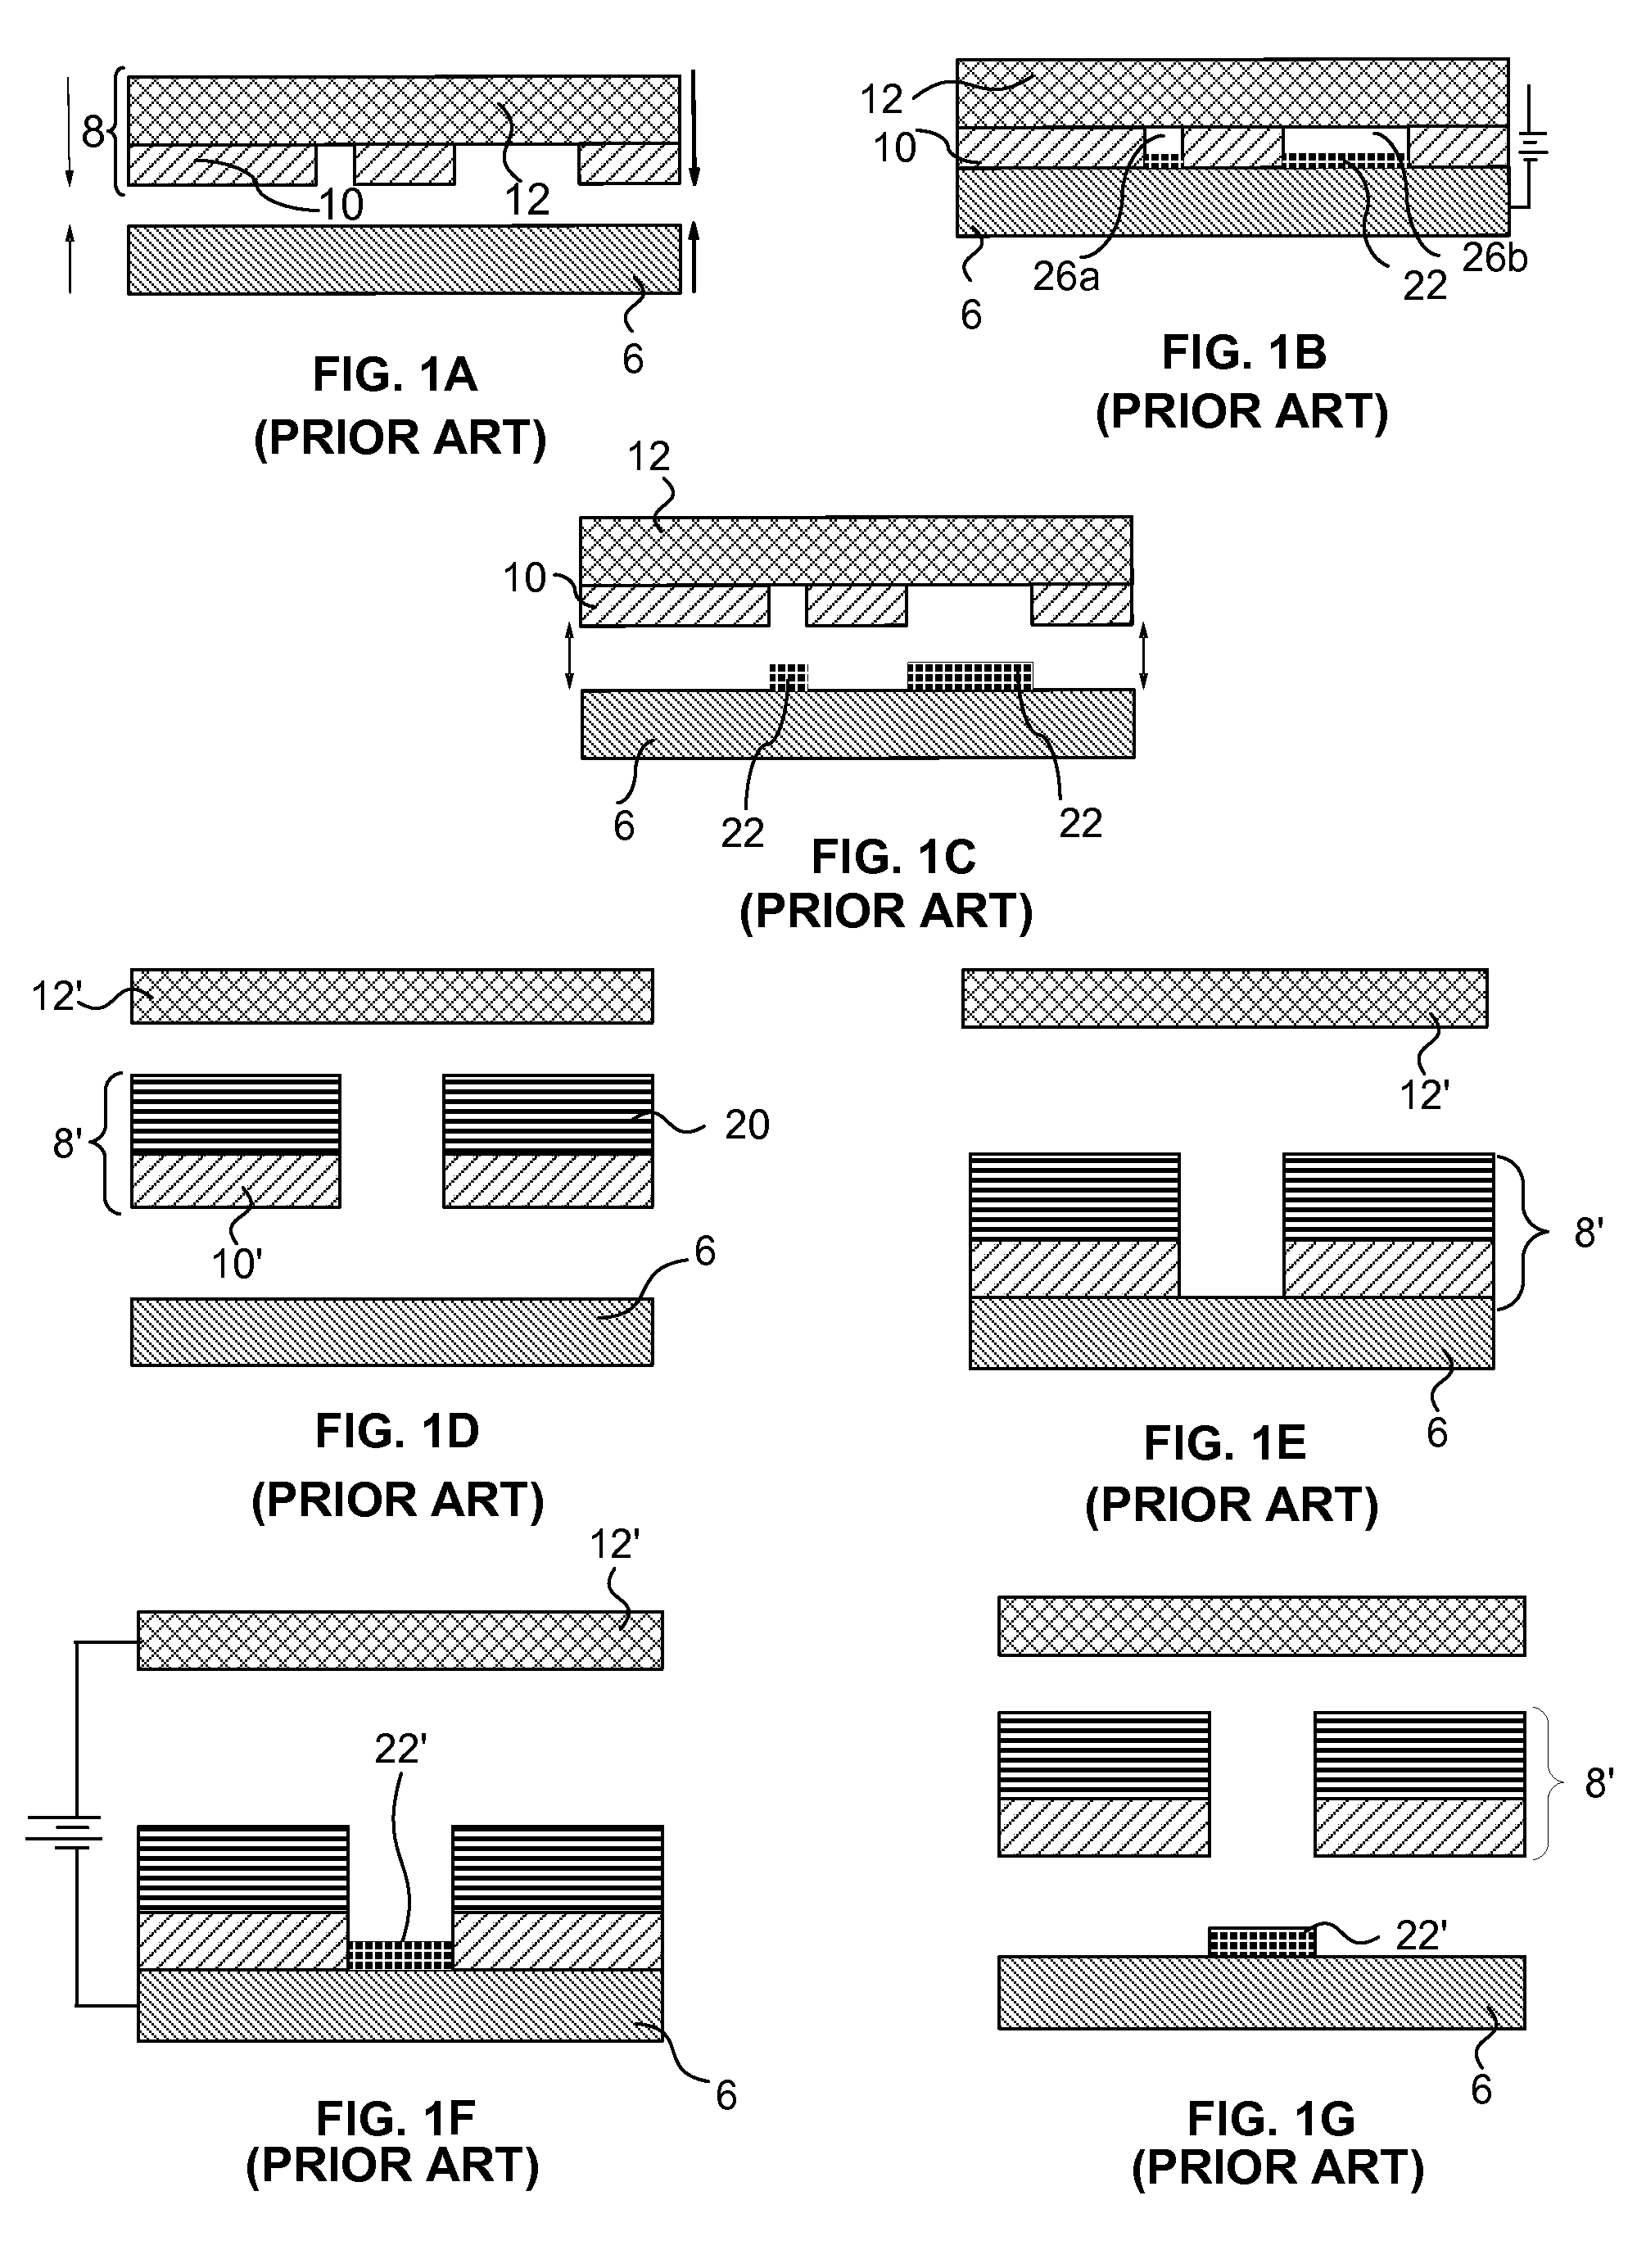 Electrochemical Fabrication Process for Forming Multilayer Multimaterial Microprobe Structures